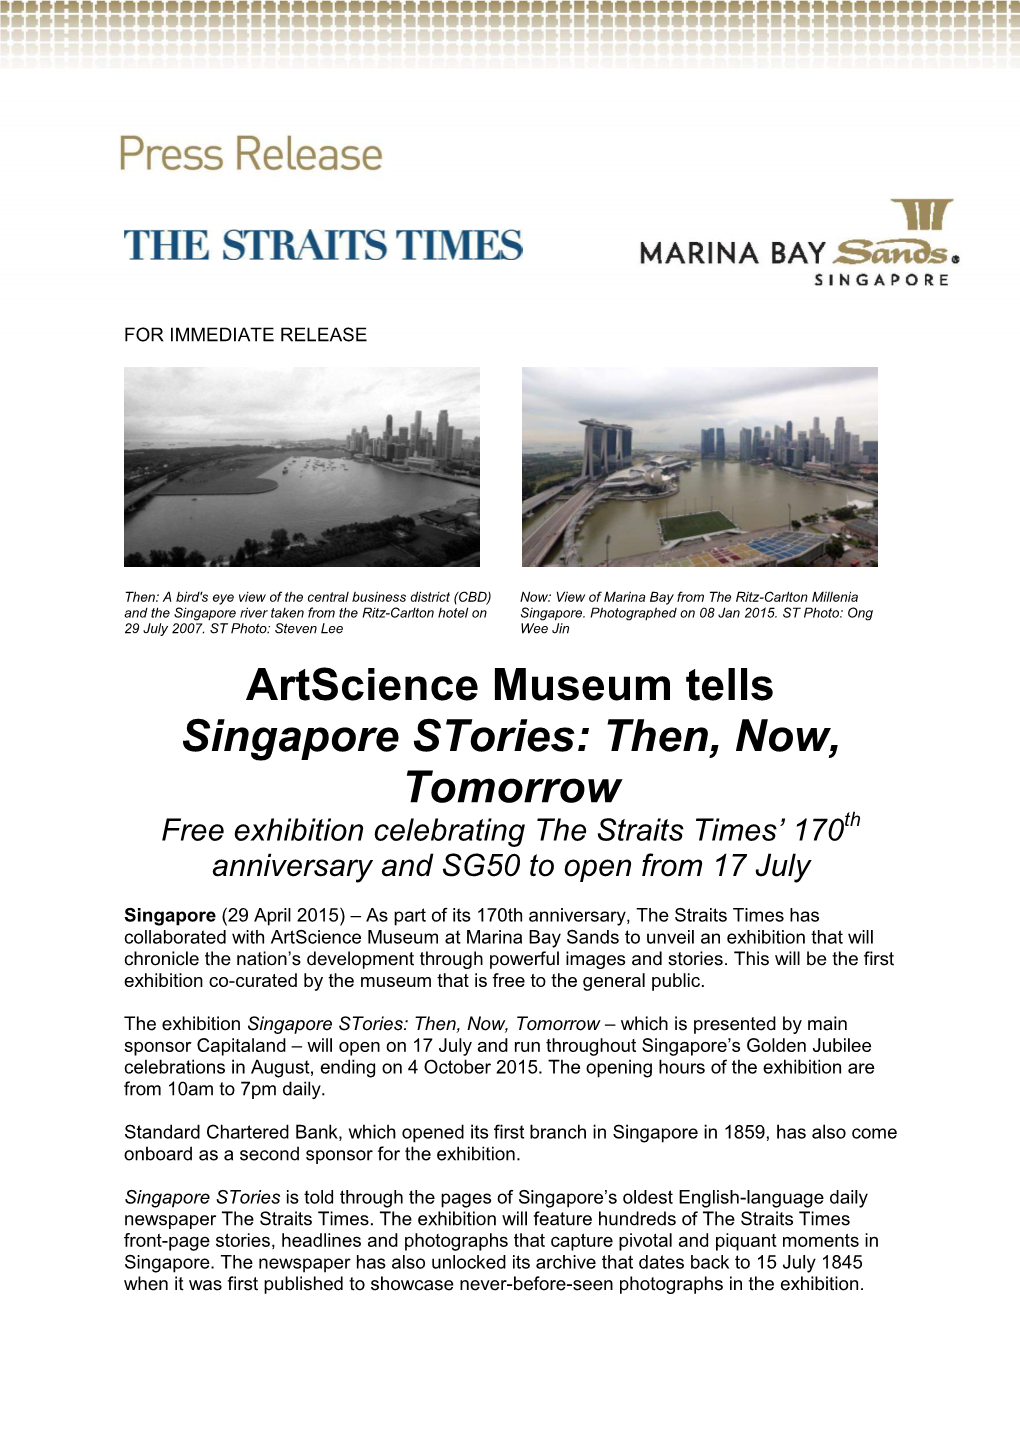 Artscience Museum Tells Singapore Stories: Then, Now, Tomorrow Free Exhibition Celebrating the Straits Times’ 170Th Anniversary and SG50 to Open from 17 July